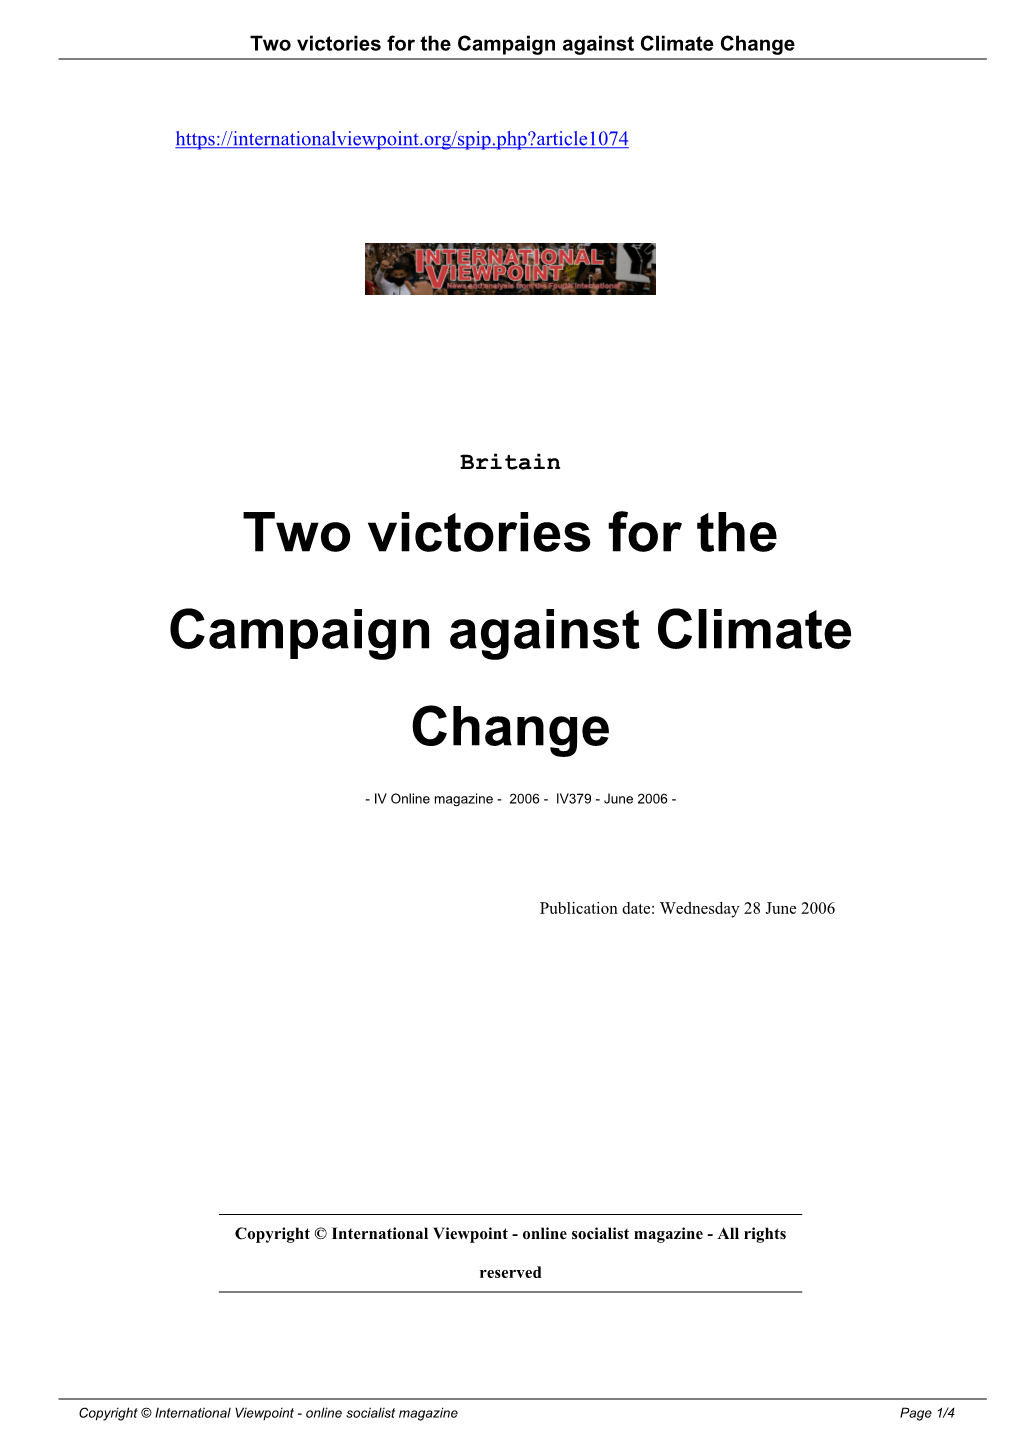 Two Victories for the Campaign Against Climate Change